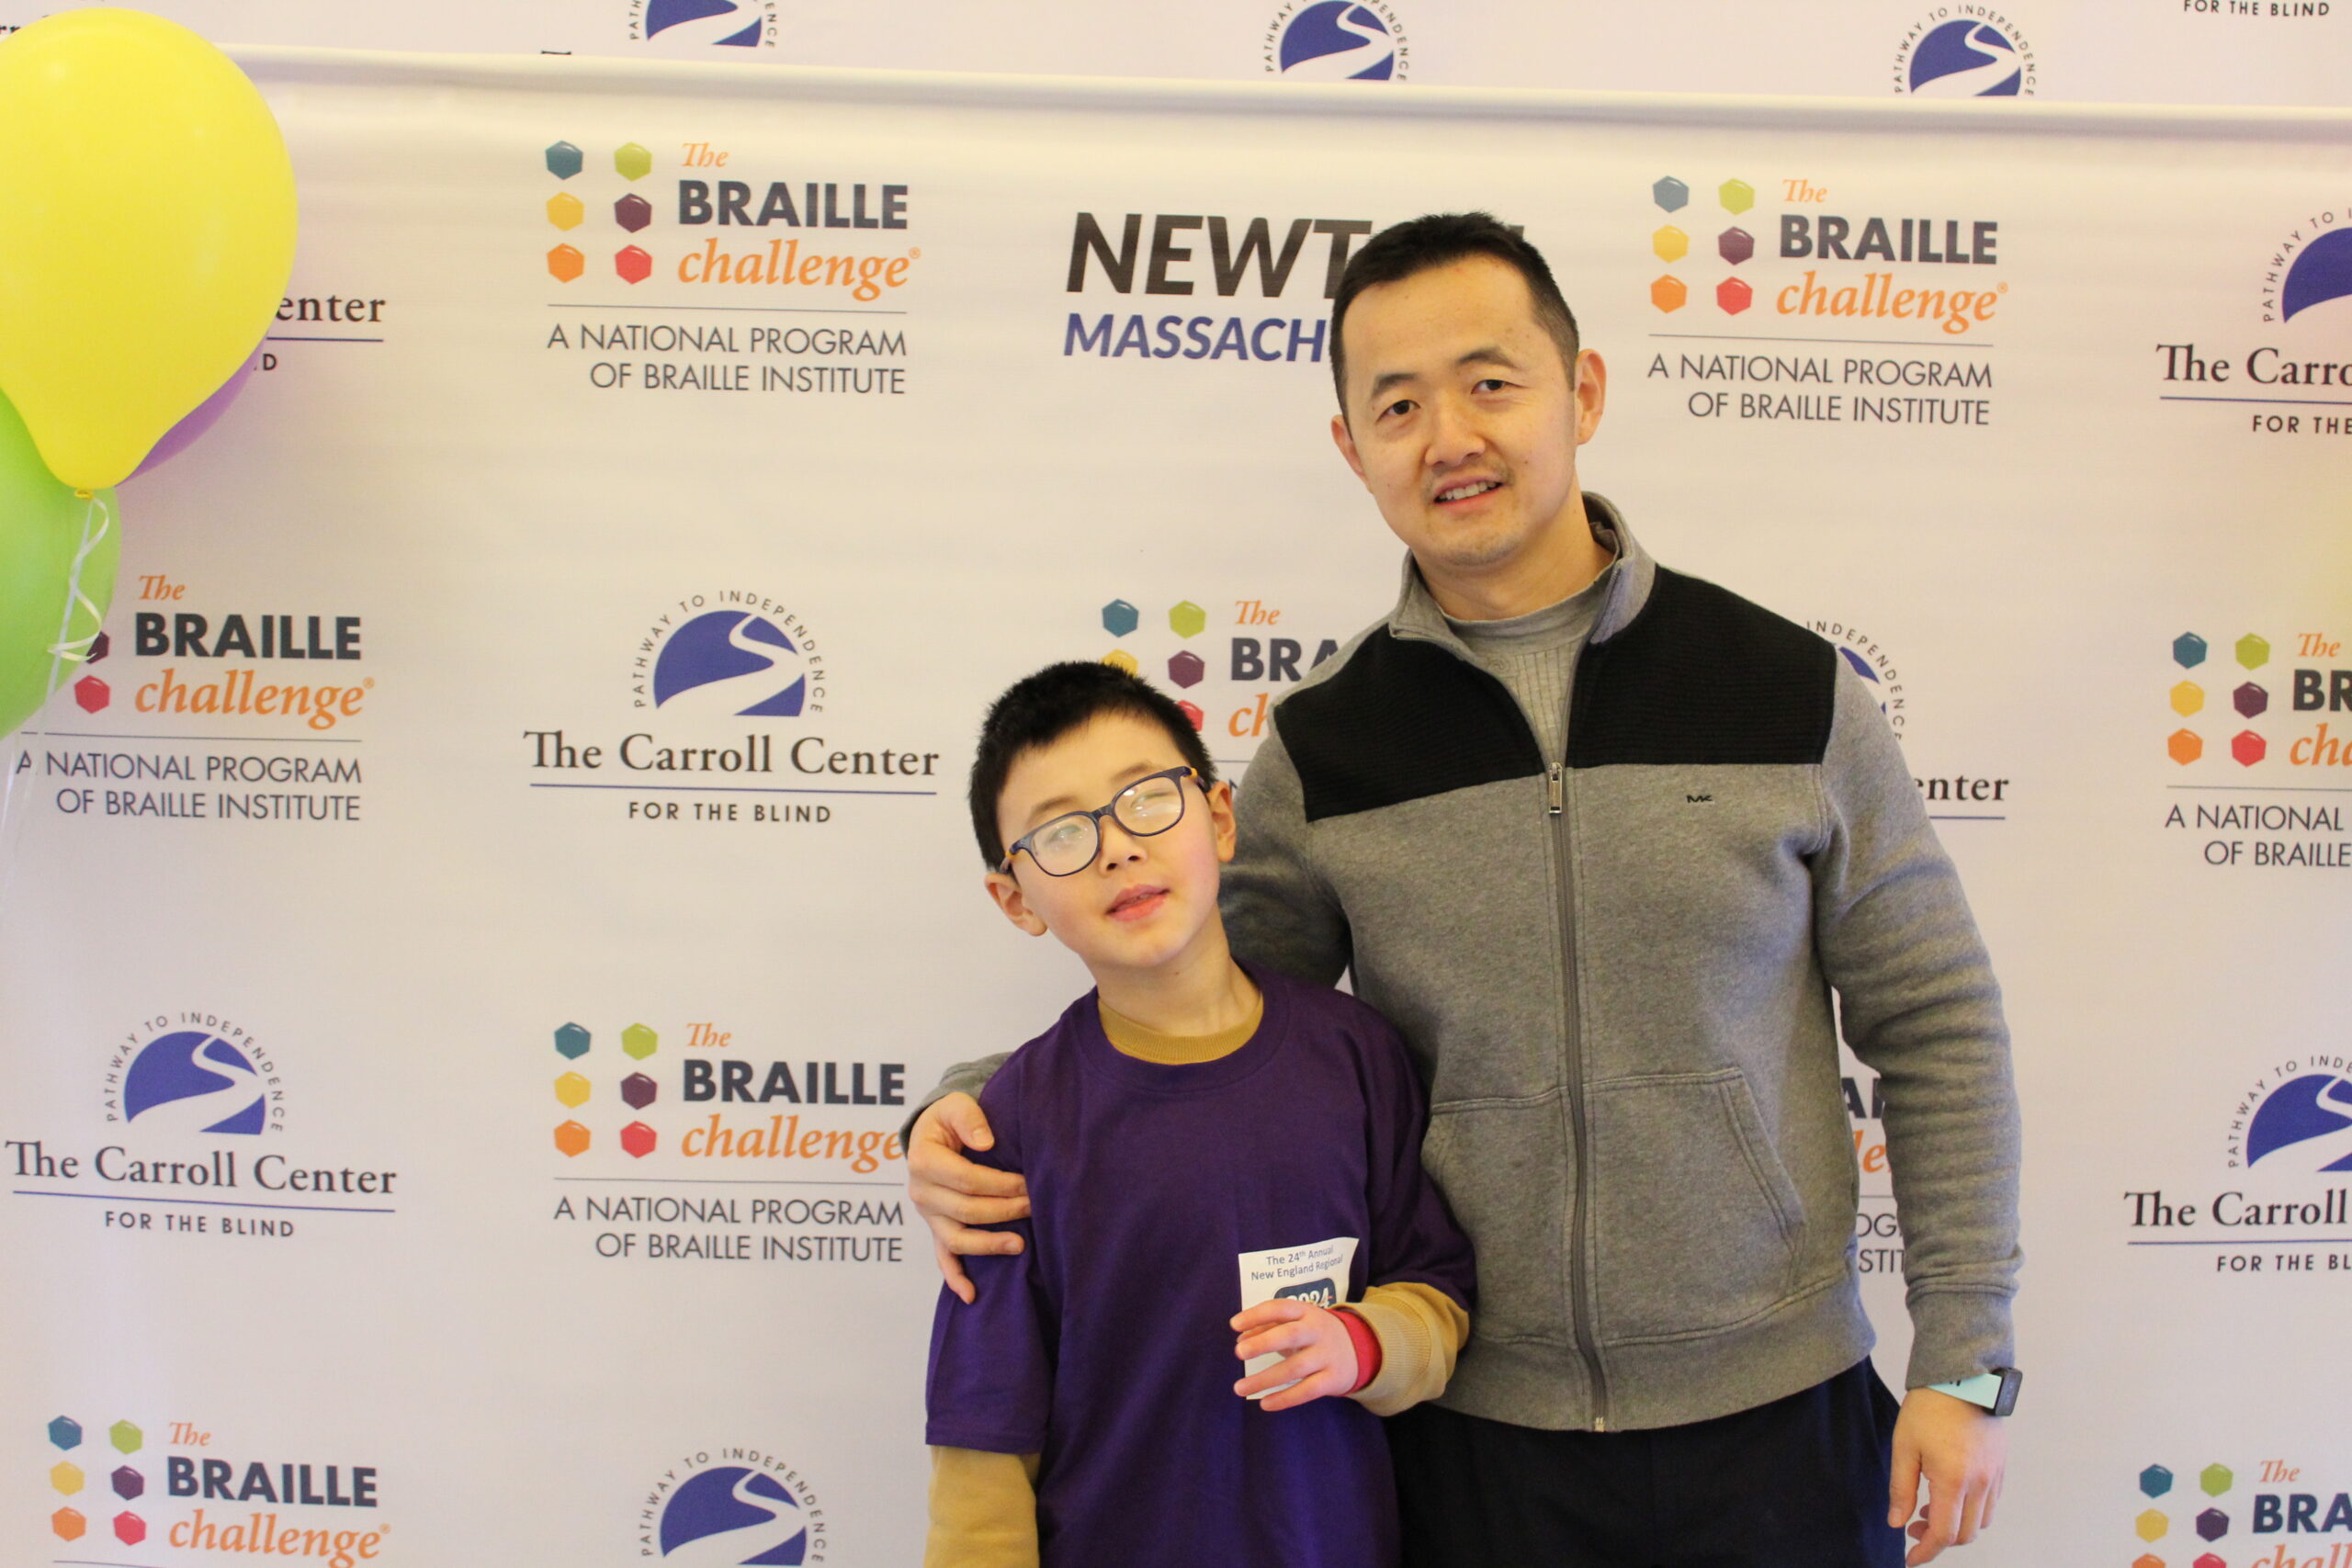 Braille Challenge participant and his father smiling for a photo in front of the Carroll Center Braille Challenge backdrop